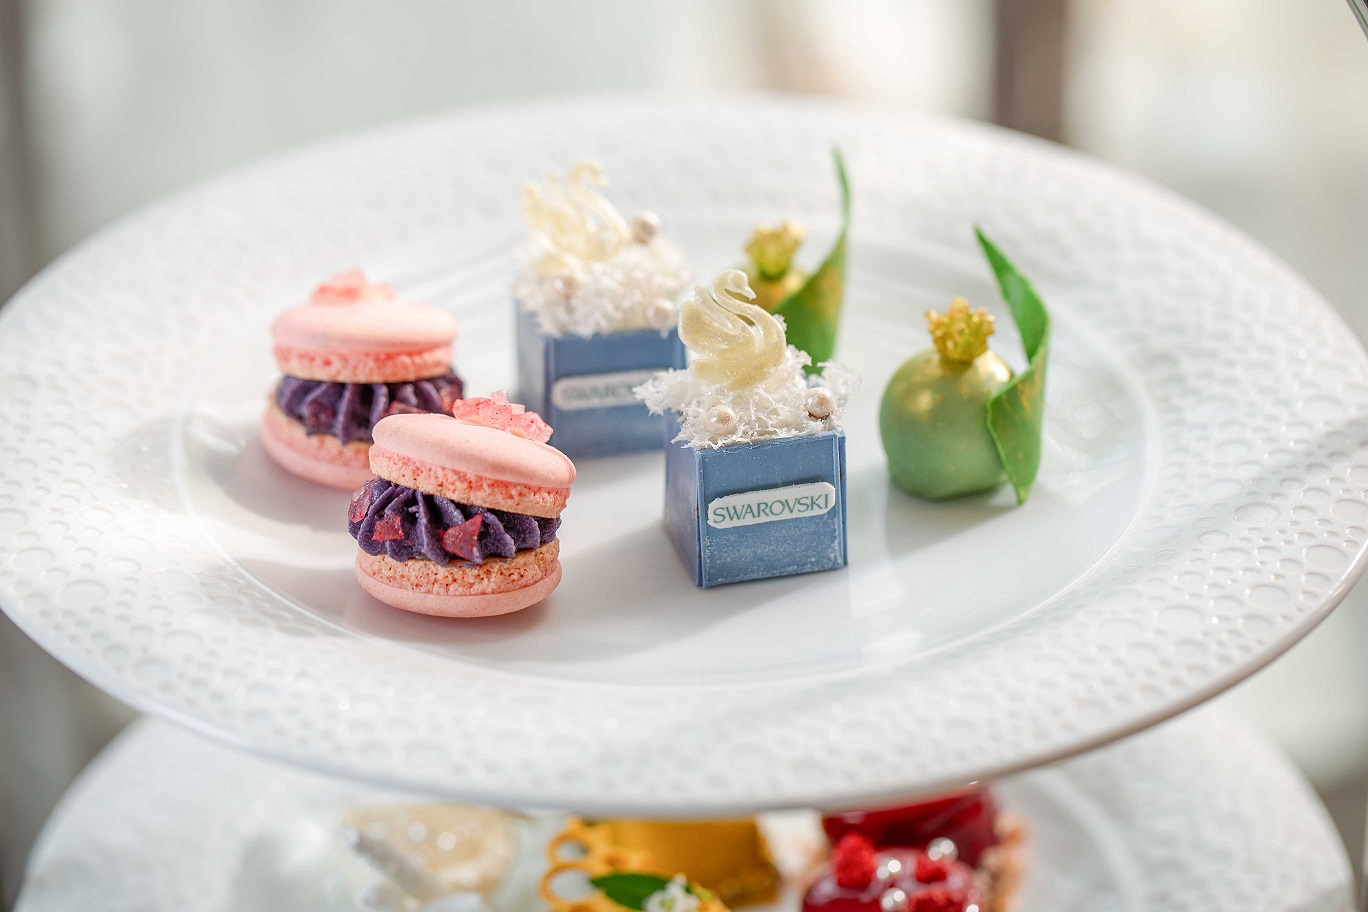 Afternoon tea inspired by Raffles and Swarovski’s timeless elegance, attention to details